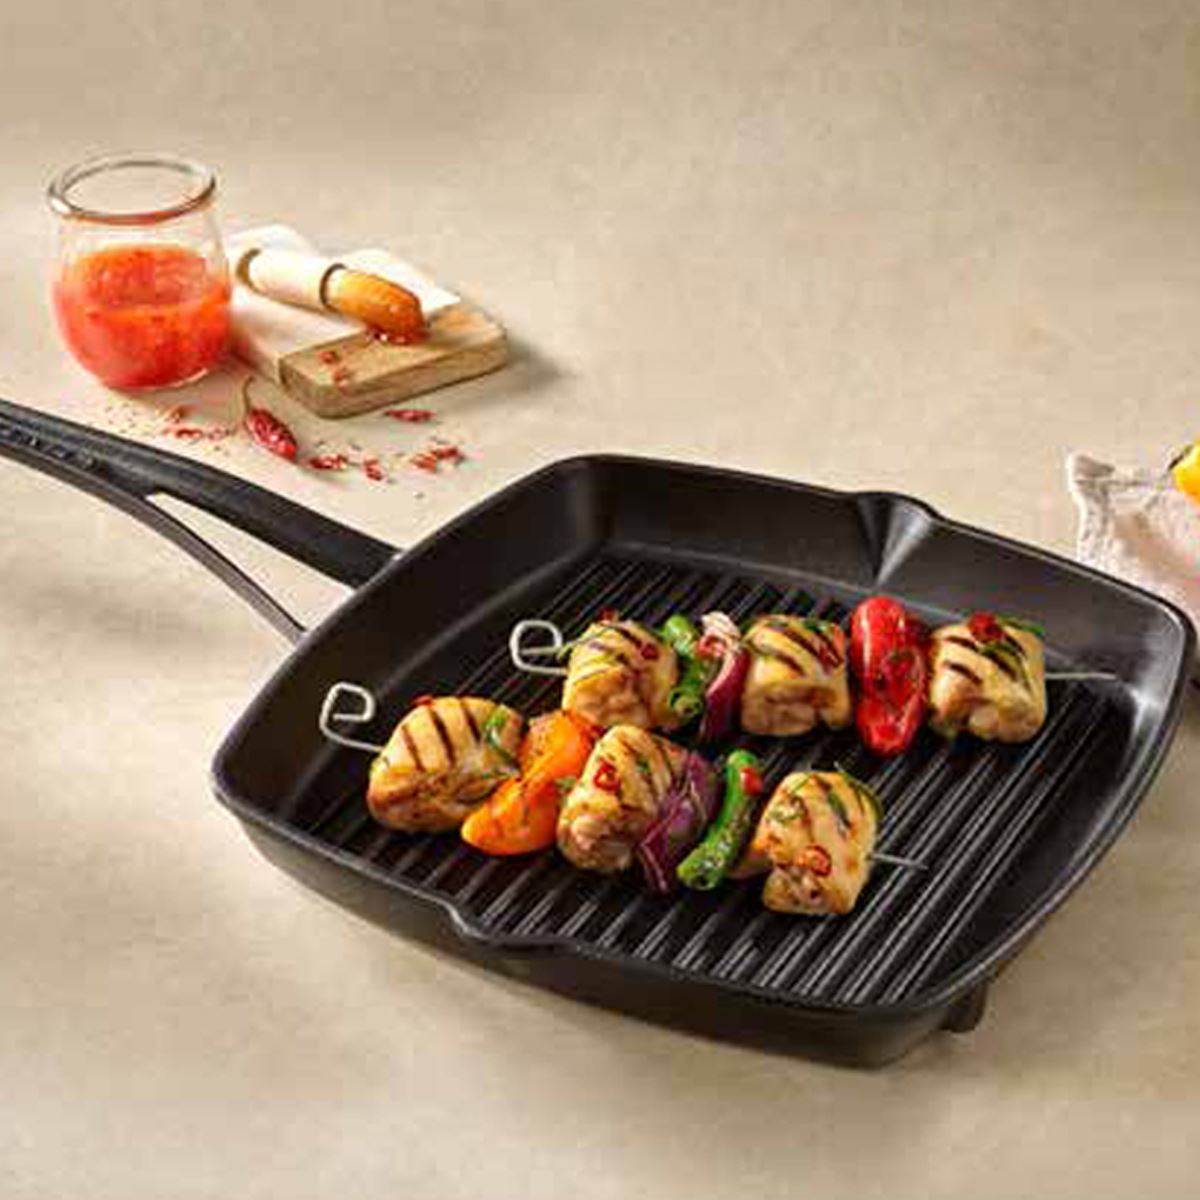 Why cast iron products are more healthier ?